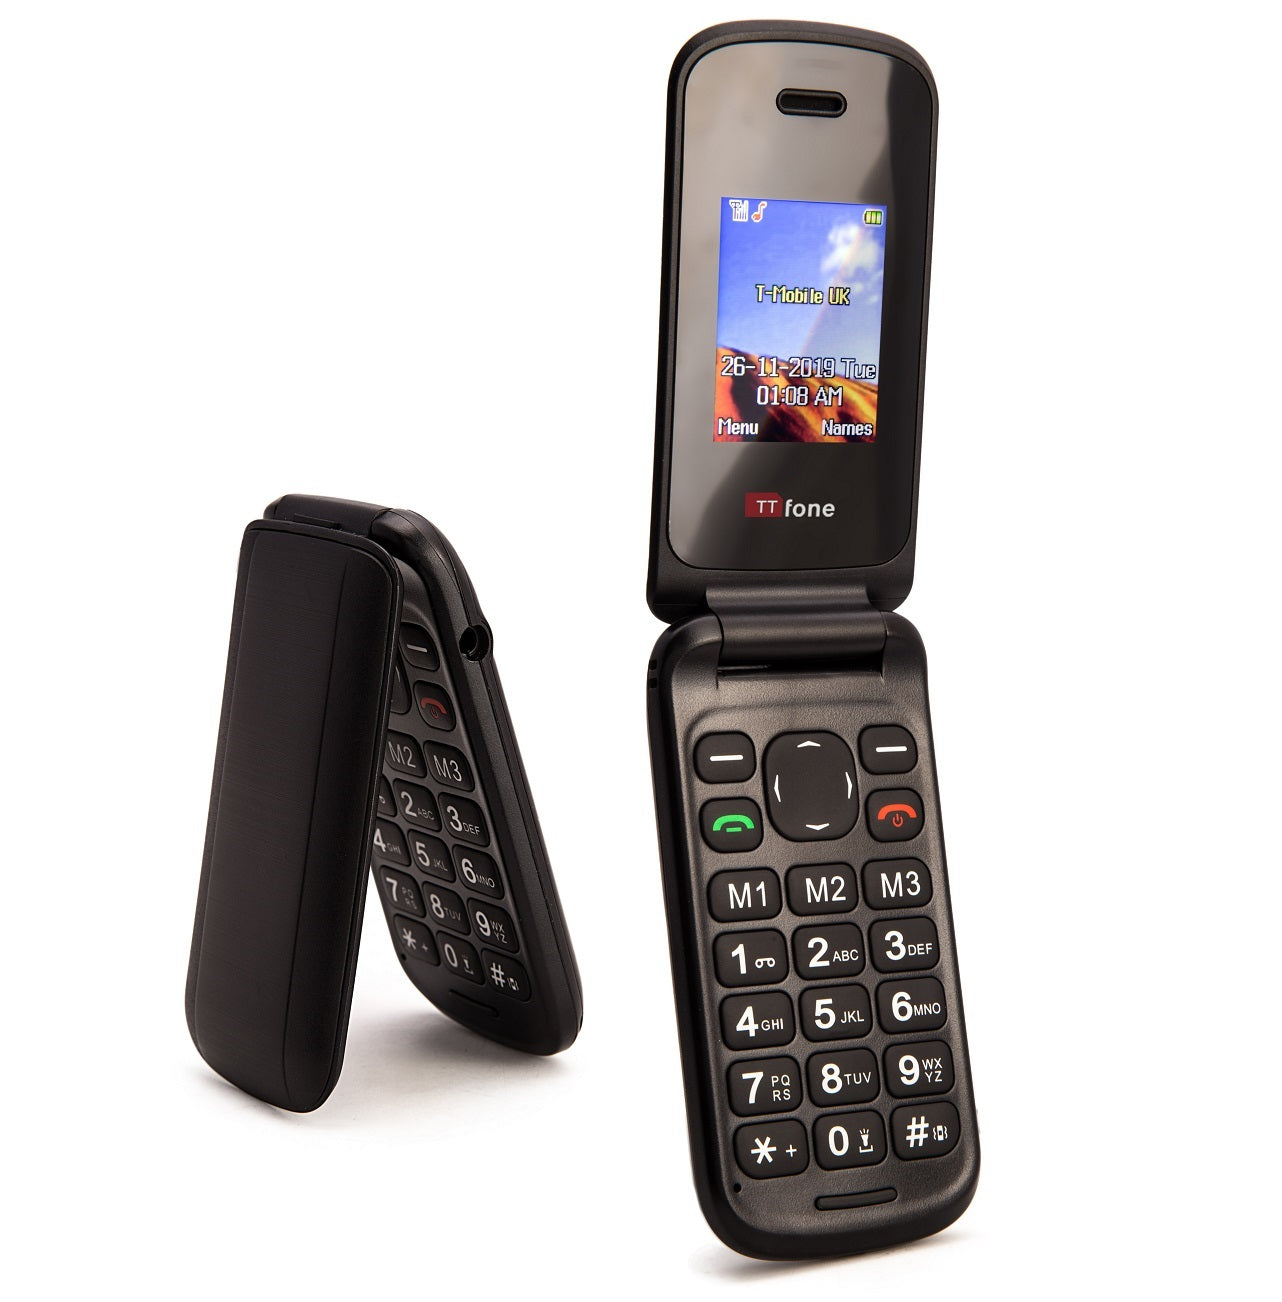 TTfone Black TT140 - Warehouse Deals with USB Cable and EE Pay As You Go 